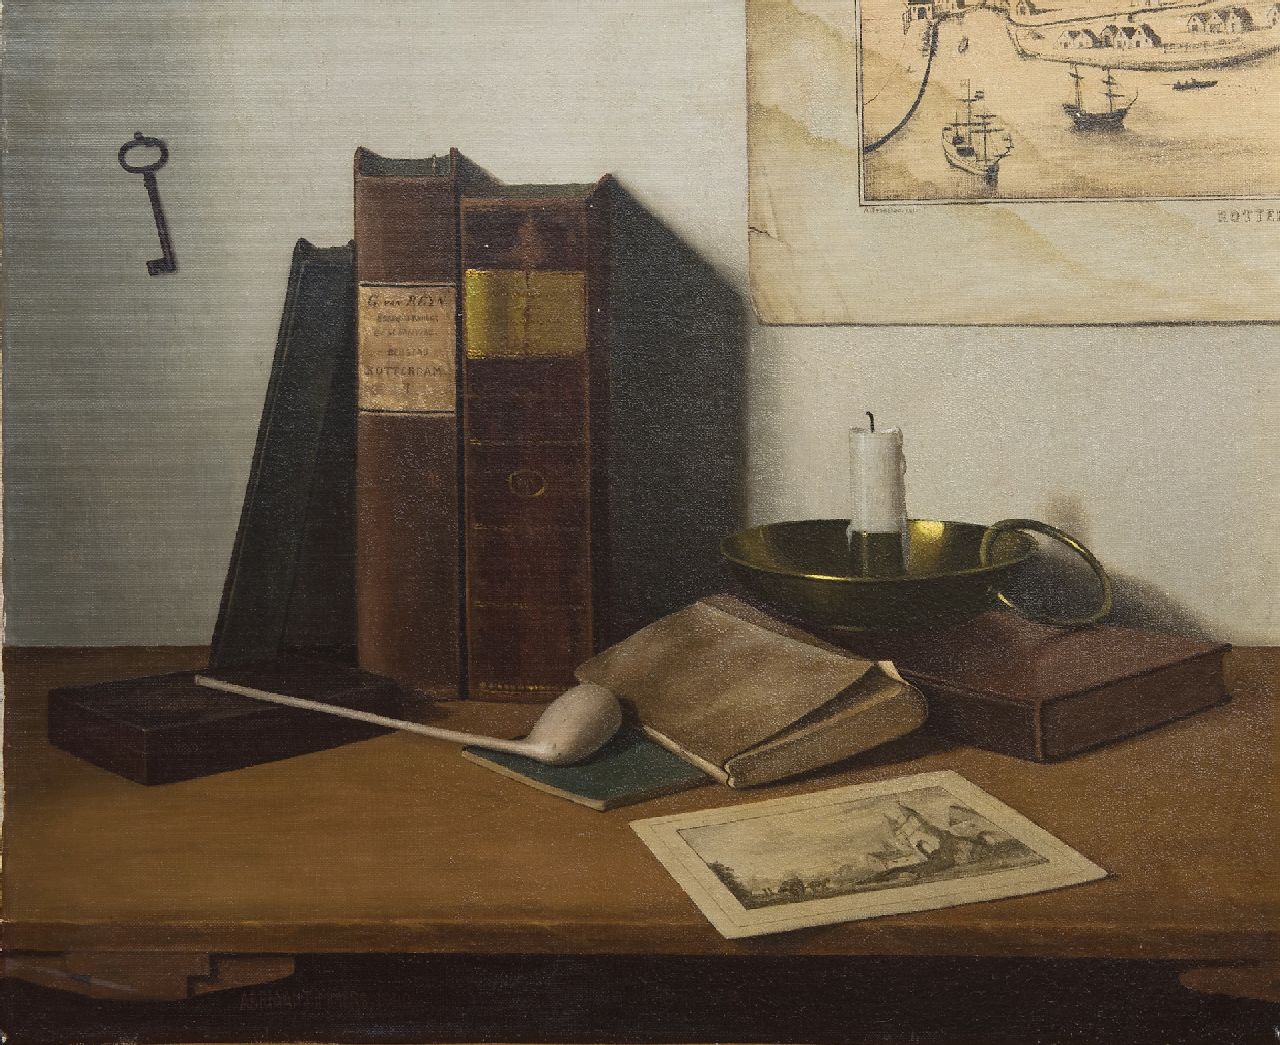 Timmers A.  | Adrianus 'Adriaan' Timmers | Paintings offered for sale | A stil life with books and an etching of Rotterdam, oil on canvas 45.1 x 55.2 cm, signed l.l. and dated 1940